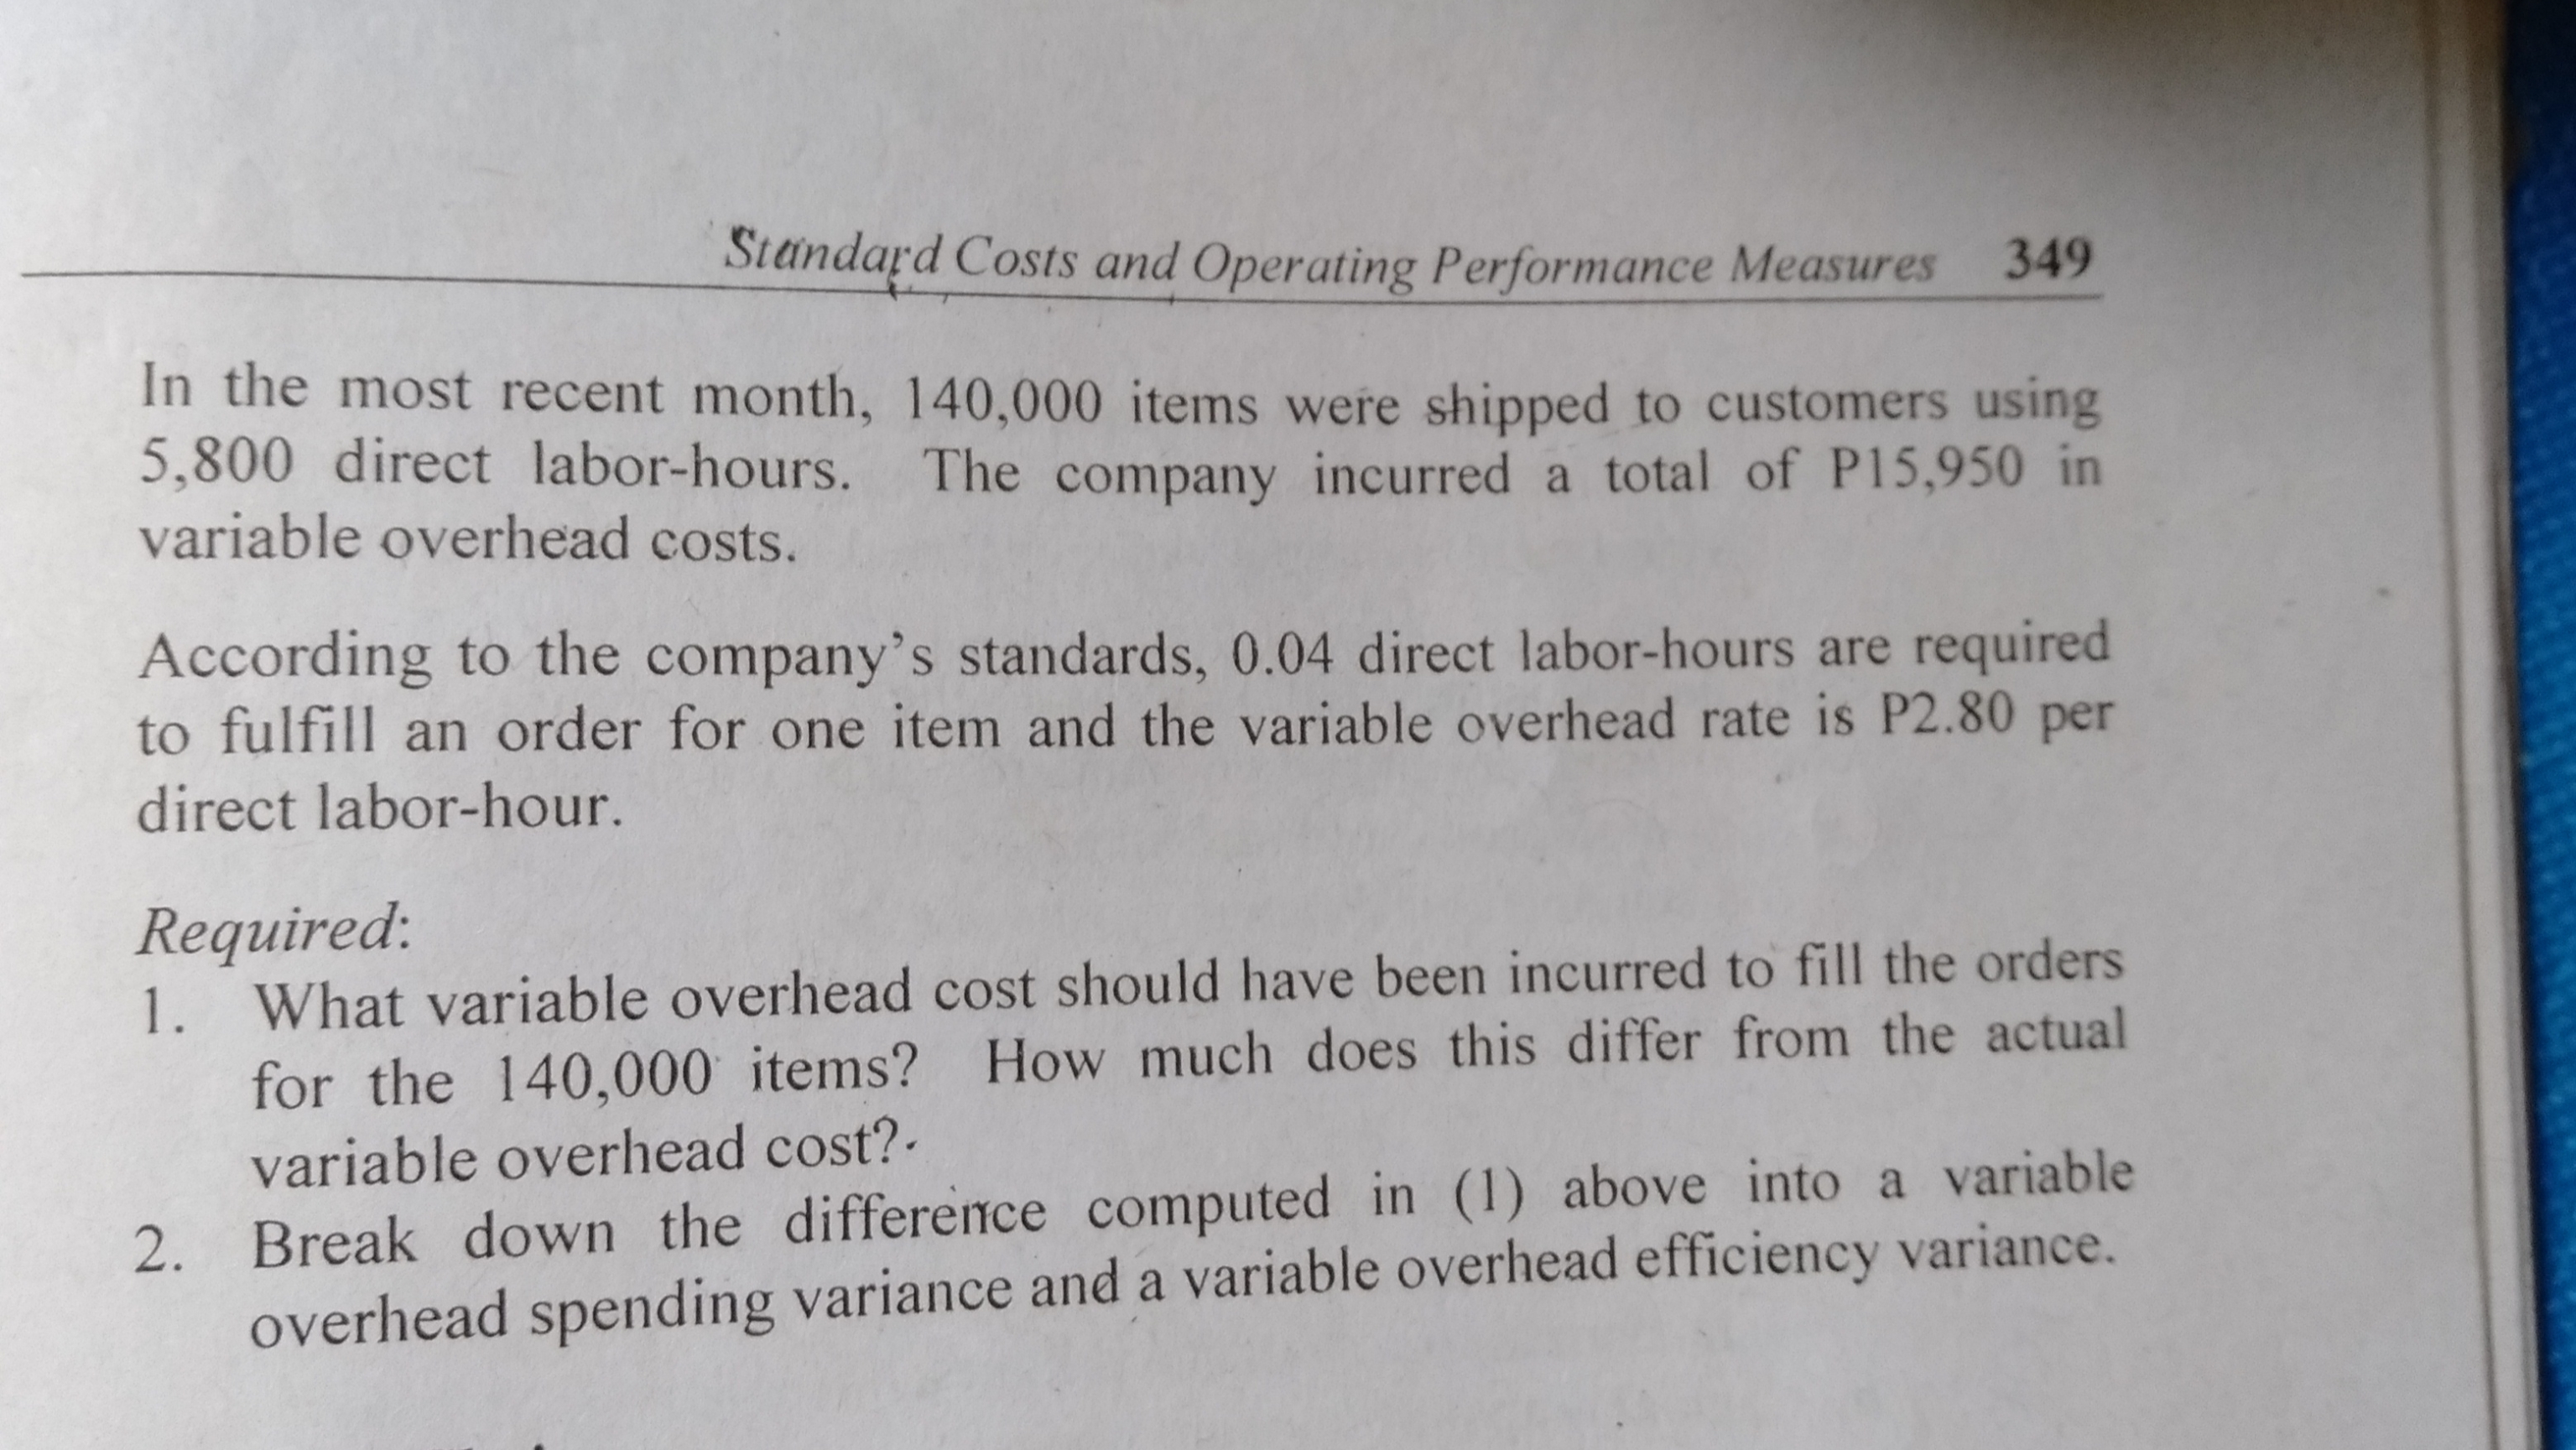 Standard Costs and Operating Performance Measures
349
In the most recent month, 140,000 items were shipped to customers using
5,800 direct labor-hours. The company incurred a total of P15,950 in
variable overhead costs.
According to the company's standards, 0.04 direct labor-hours are required
to fulfill an order for one item and the variable overhead rate is P2.80 per
direct labor-hour.
Required:
1. What variable overhead cost should have been incurred to fill the orders
for the 140,000 items? How much does this differ from the actual
variable overhead cost?
2. Break down the difference computed in (1) above into a variable
overhead spending variance and a variable overhead efficiency variance.
